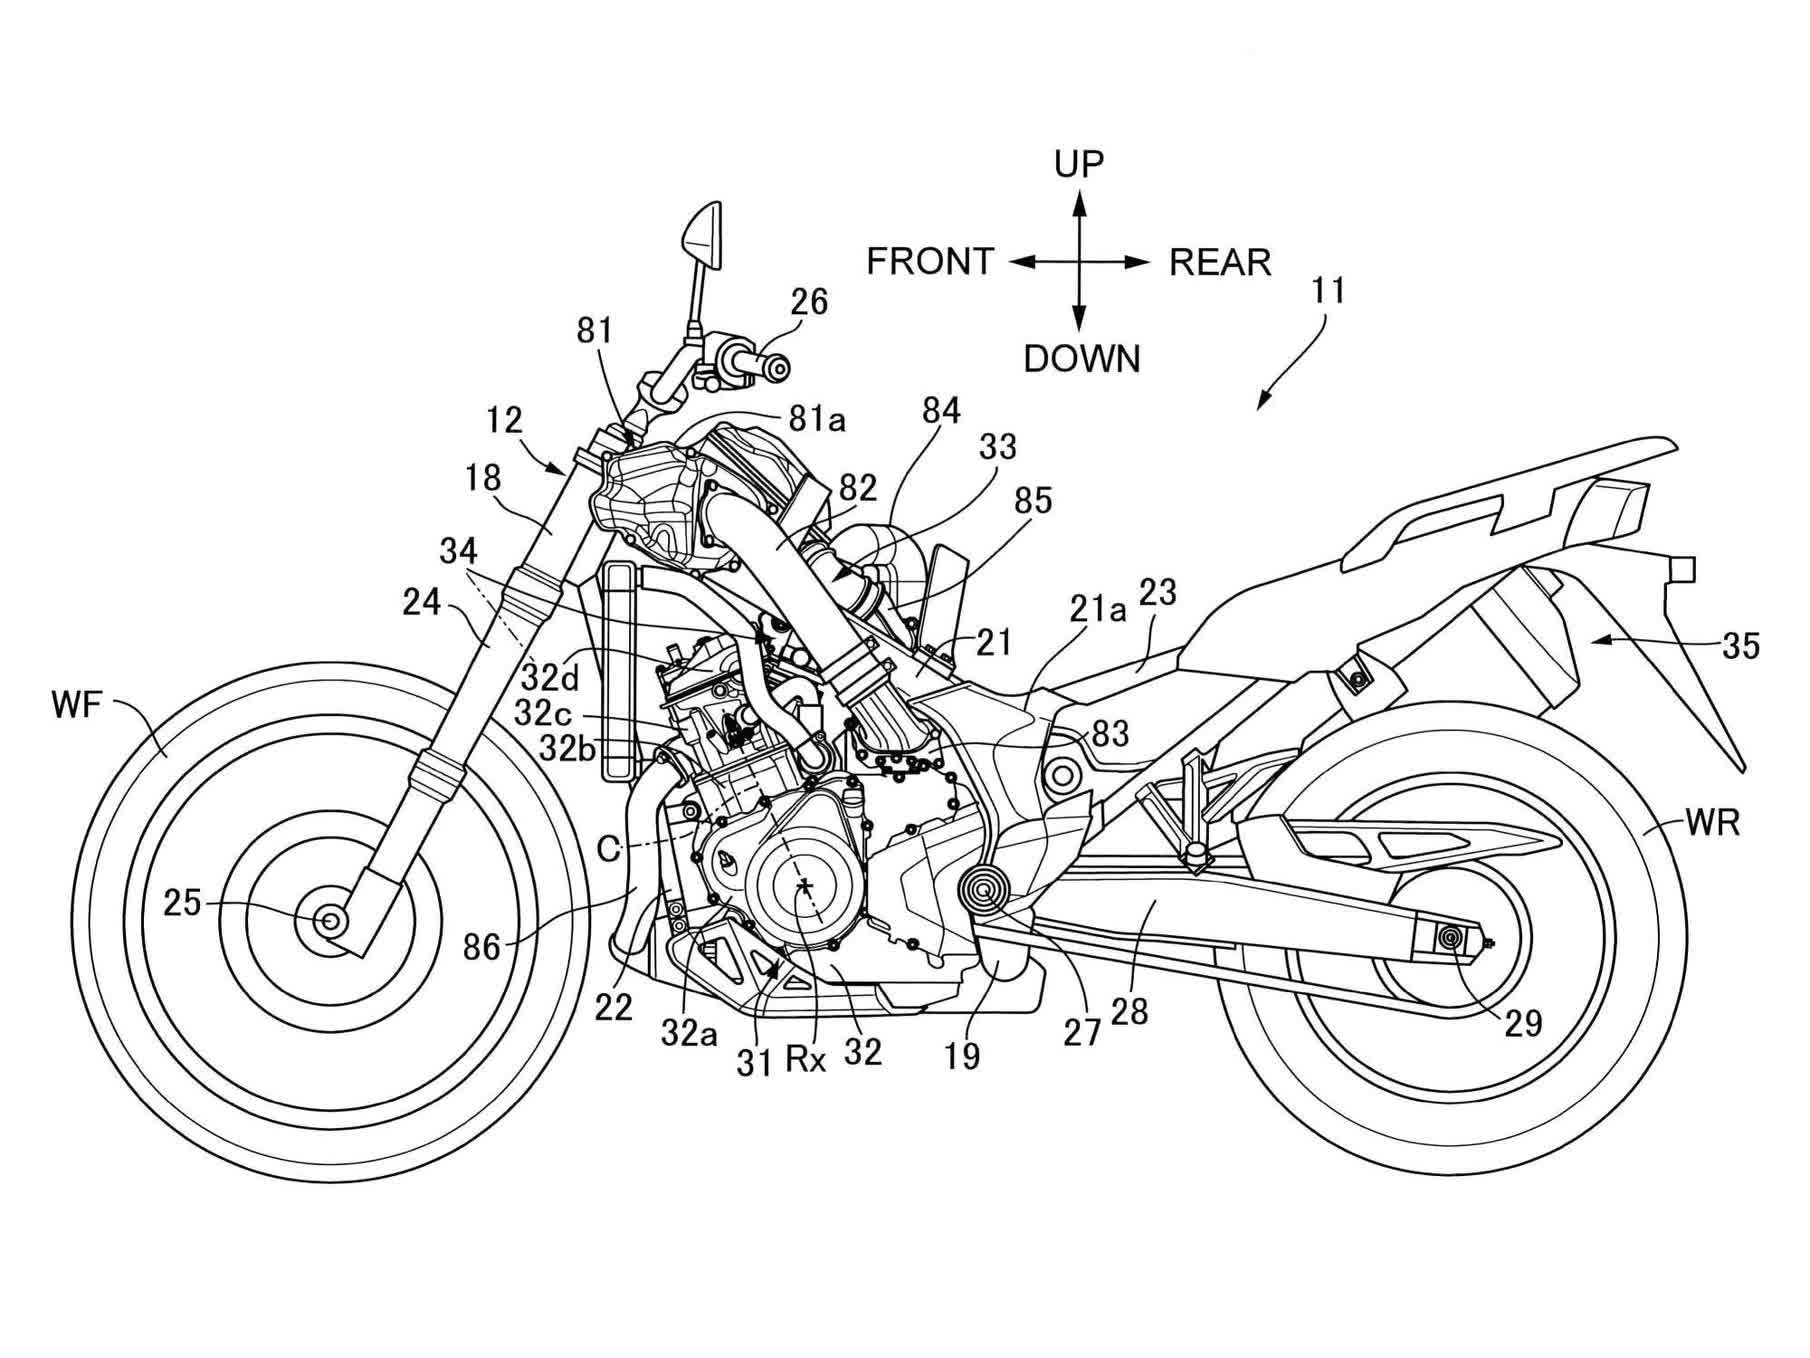 Honda works on supercharged Africa Twin
- also in the App MOTORCYCLE NEWS